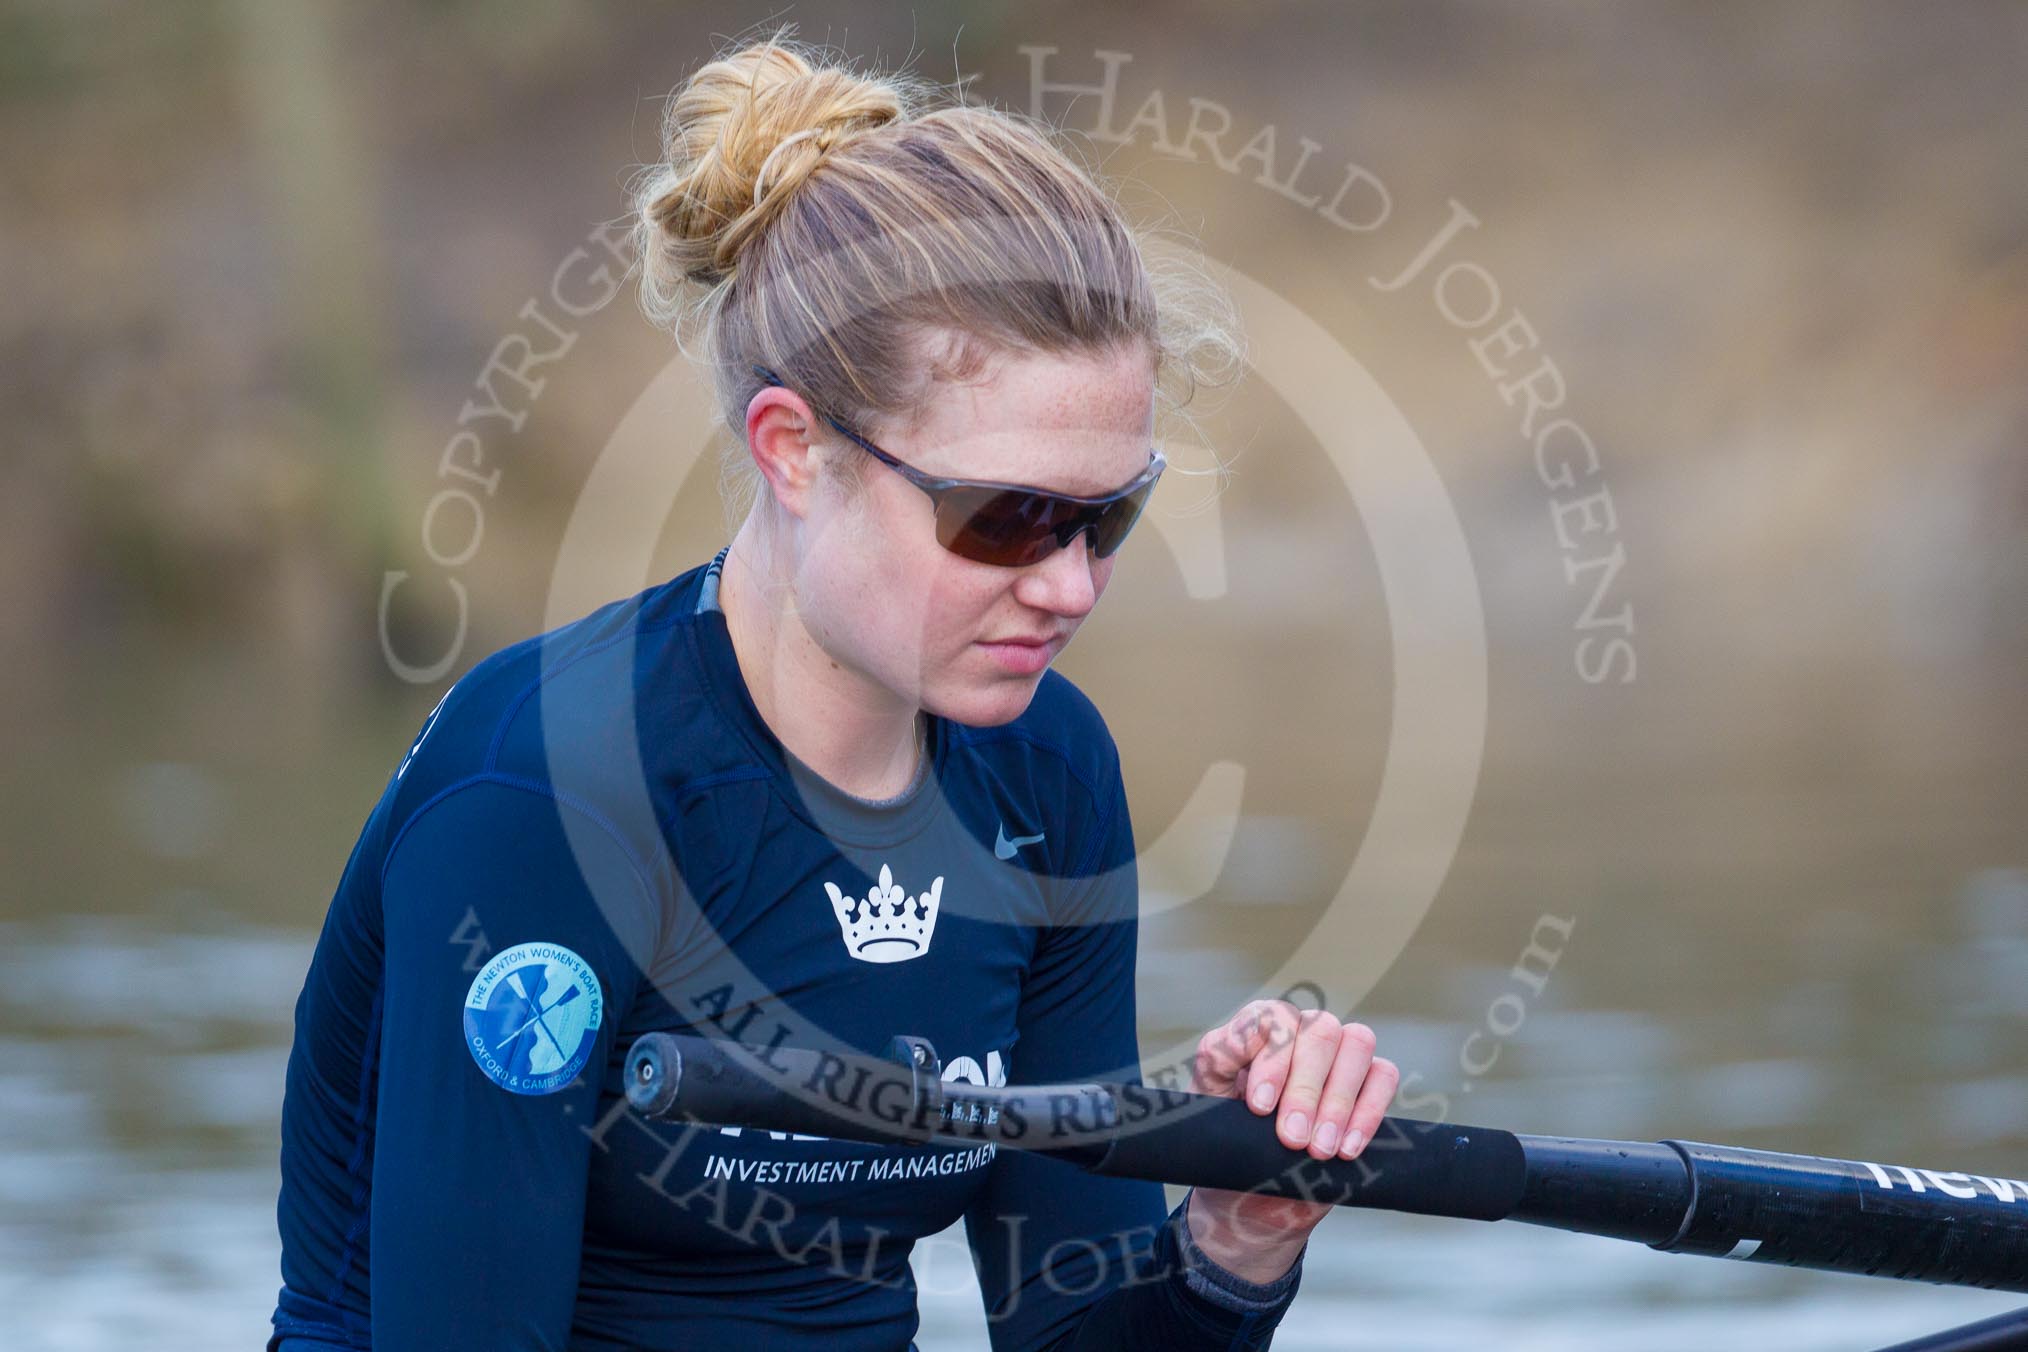 The Boat Race season 2015: OUWBC training Wallingford.

Wallingford,

United Kingdom,
on 04 March 2015 at 16:39, image #218